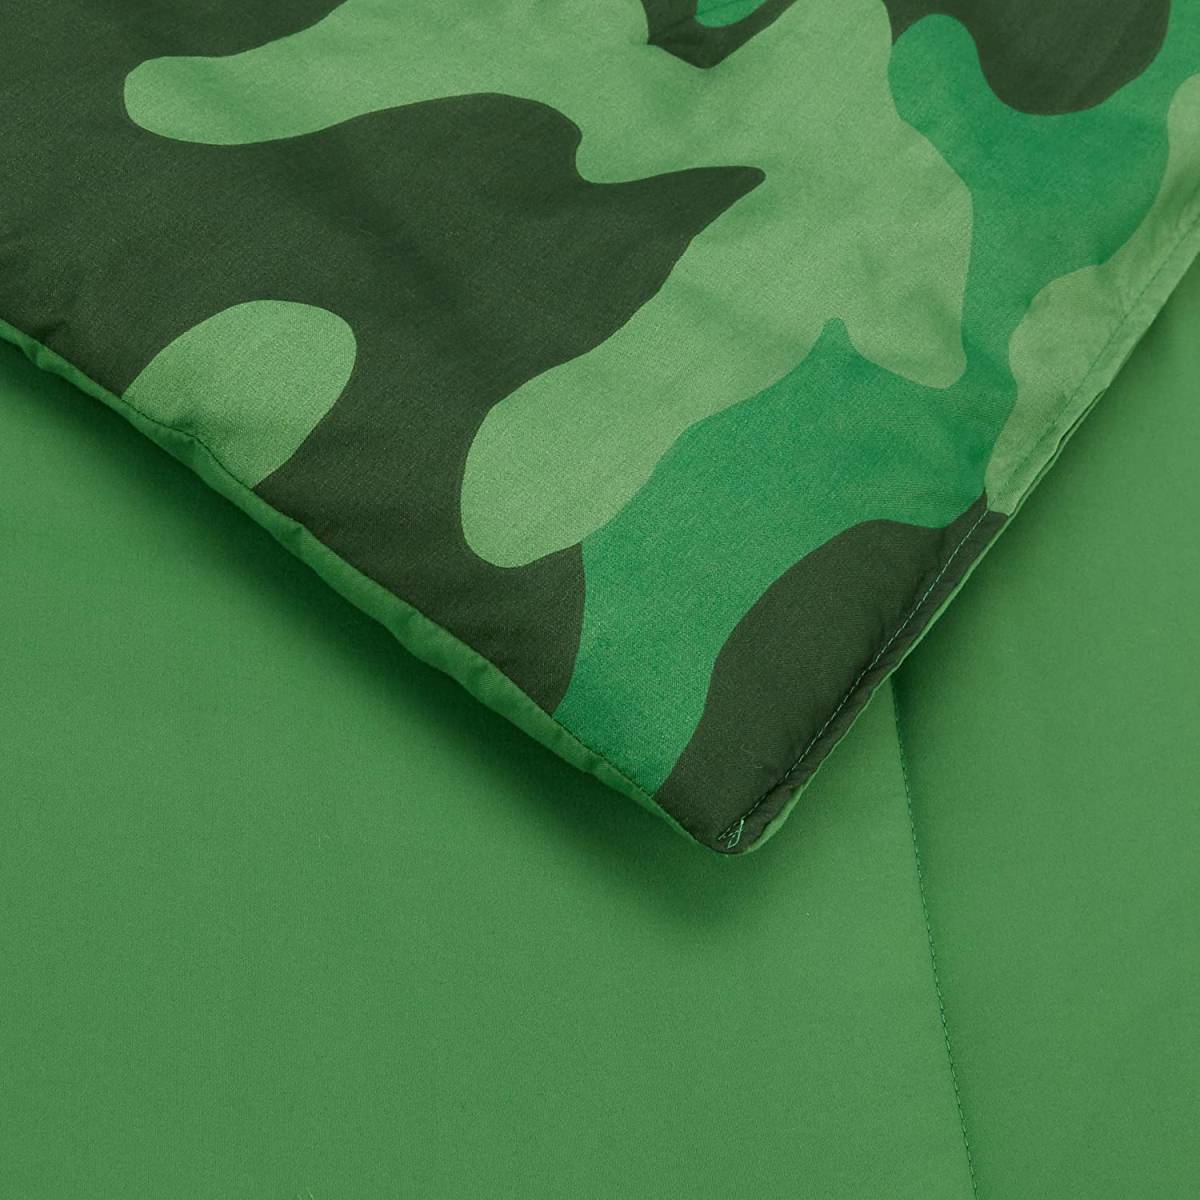  free shipping new goods Amazon Basic quilt bedding set Kids for microfibre material camouflage k roots in 